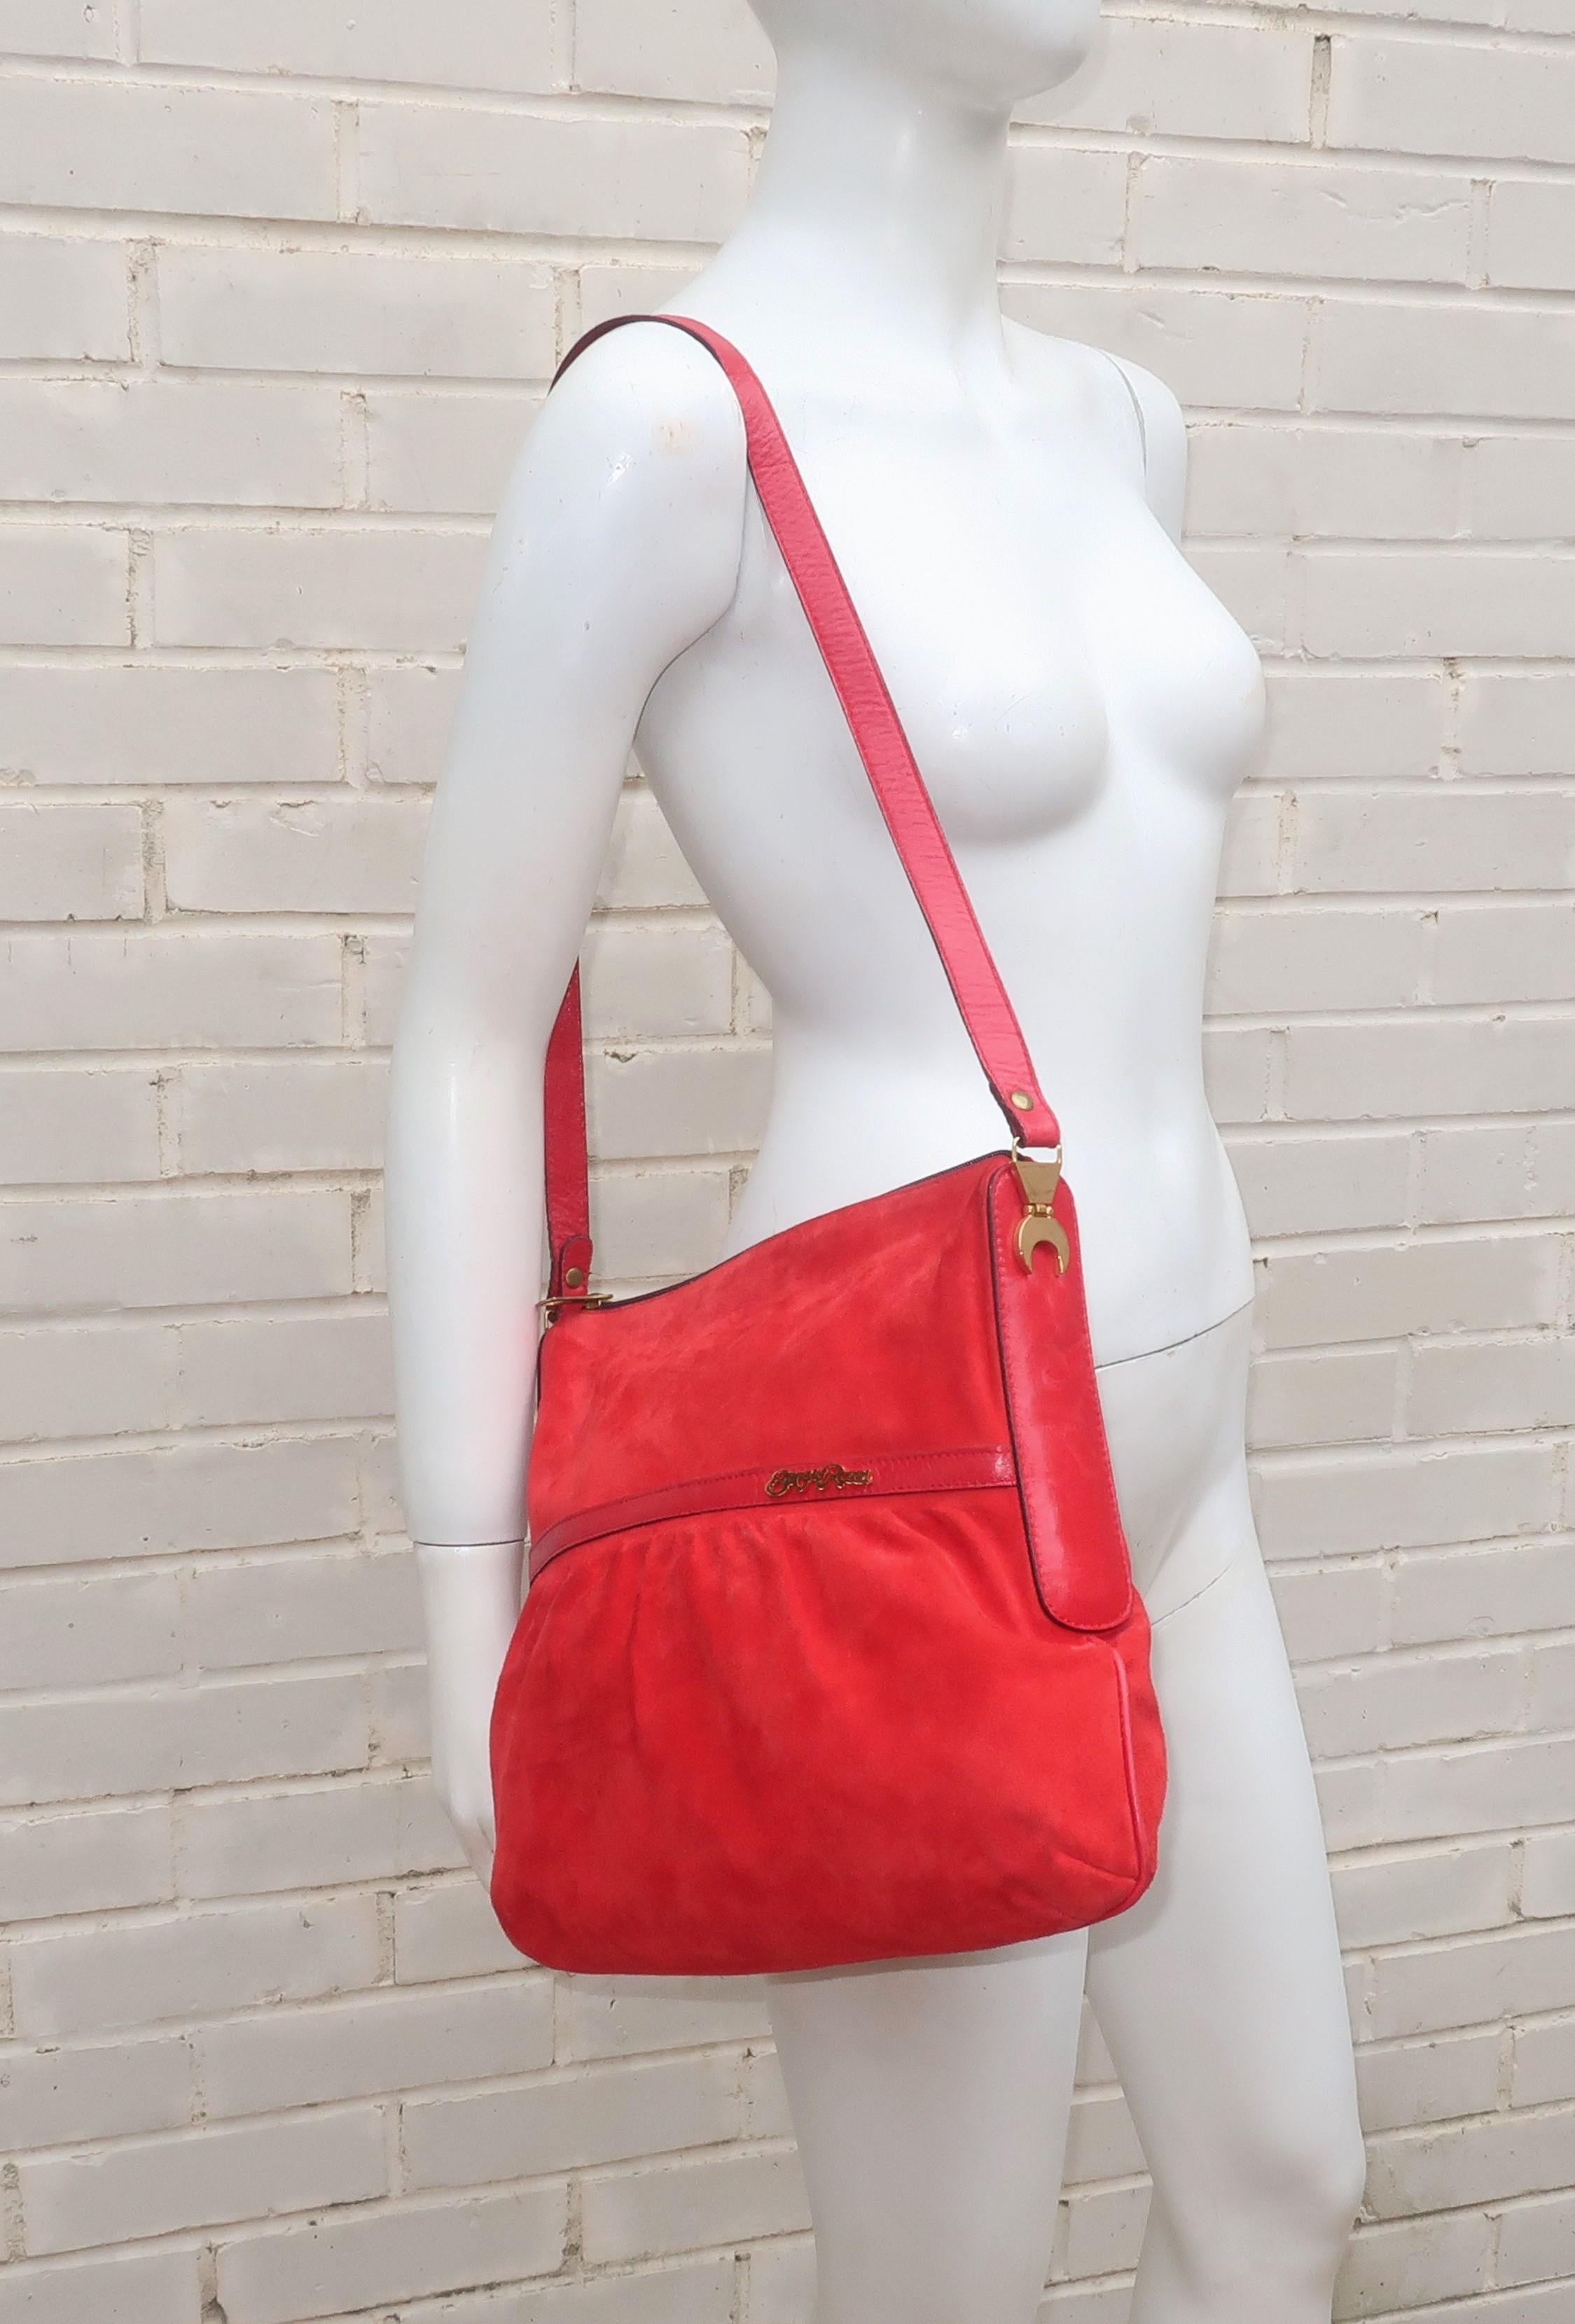 Sergio Rossi Red Suede Leather Handbag, 1970's For Sale 10